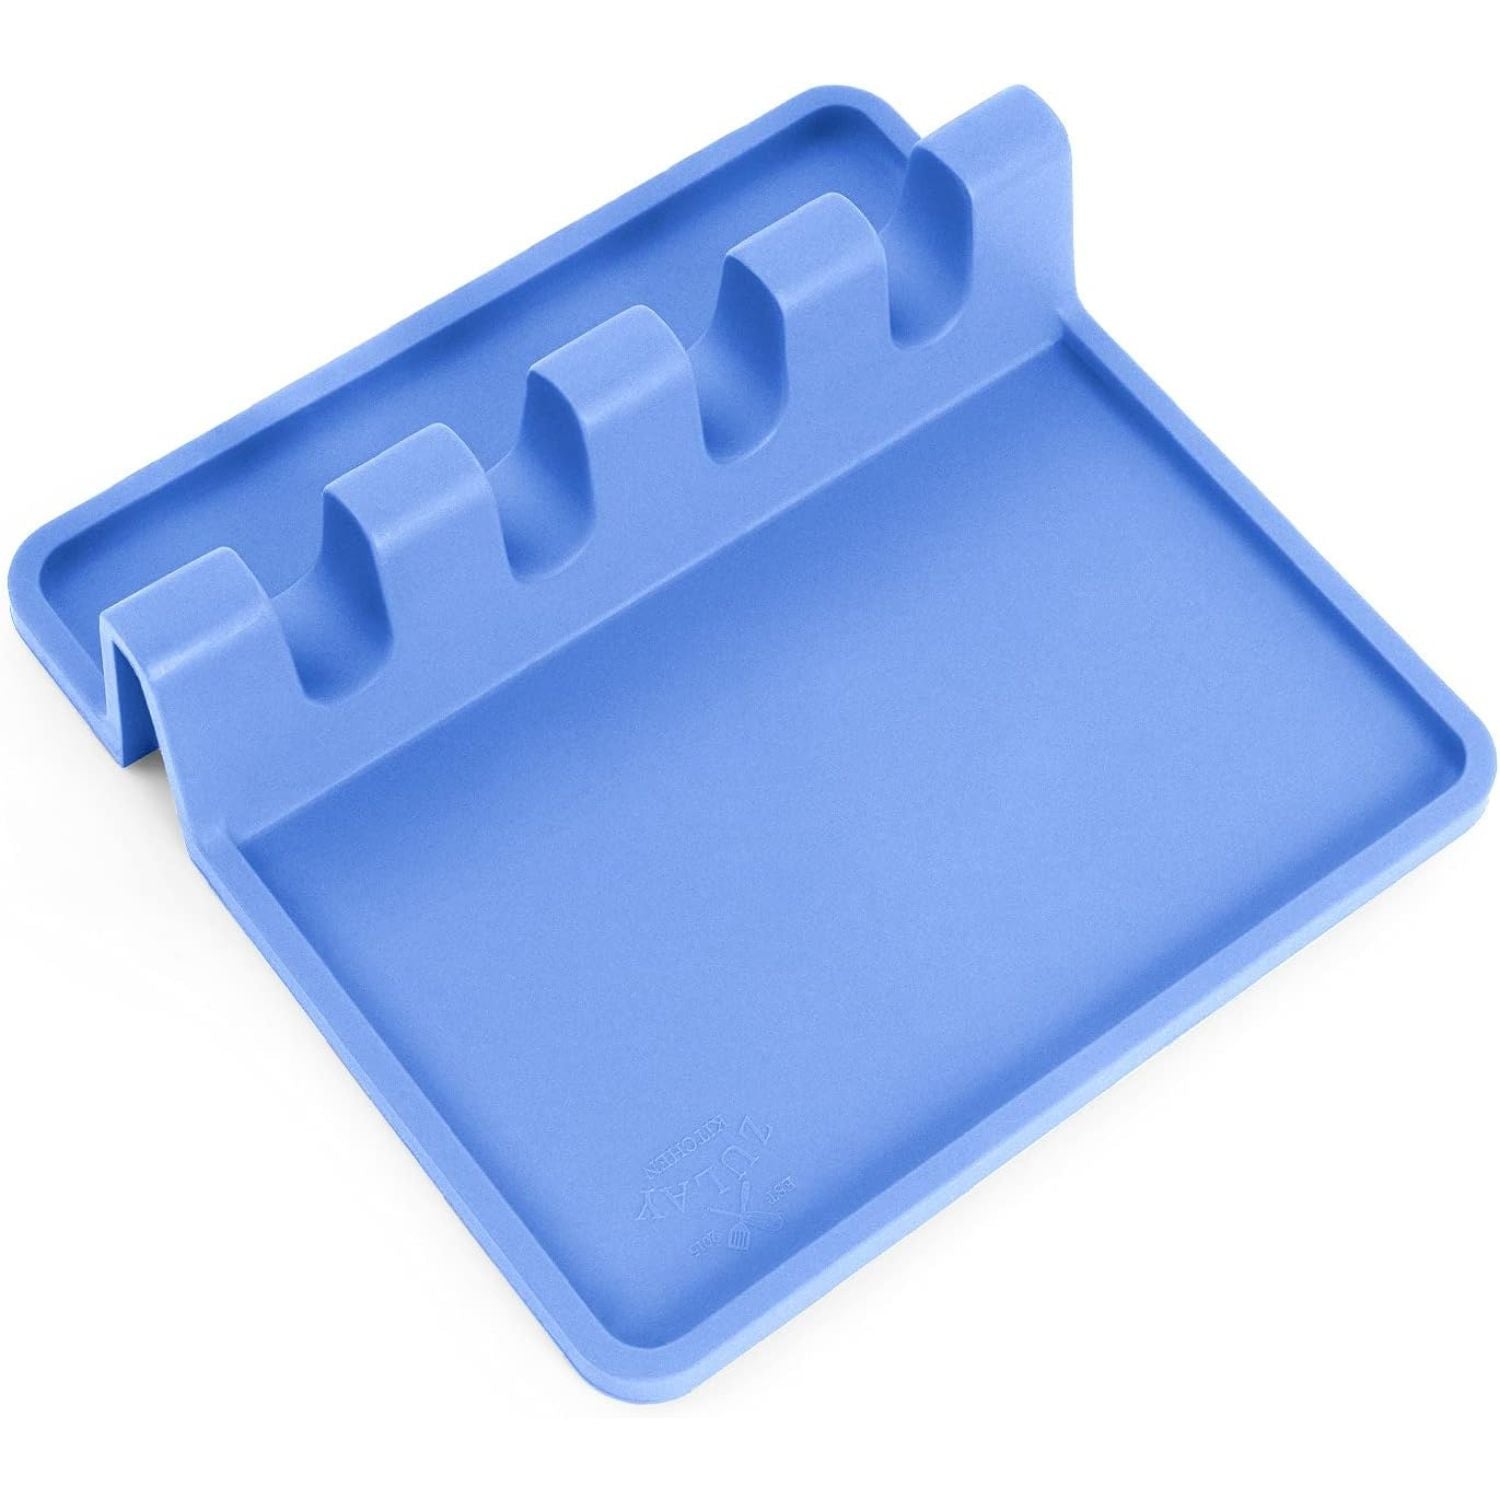 Zulay Kitchen Silicone Multipurpose Tray Holder Gray